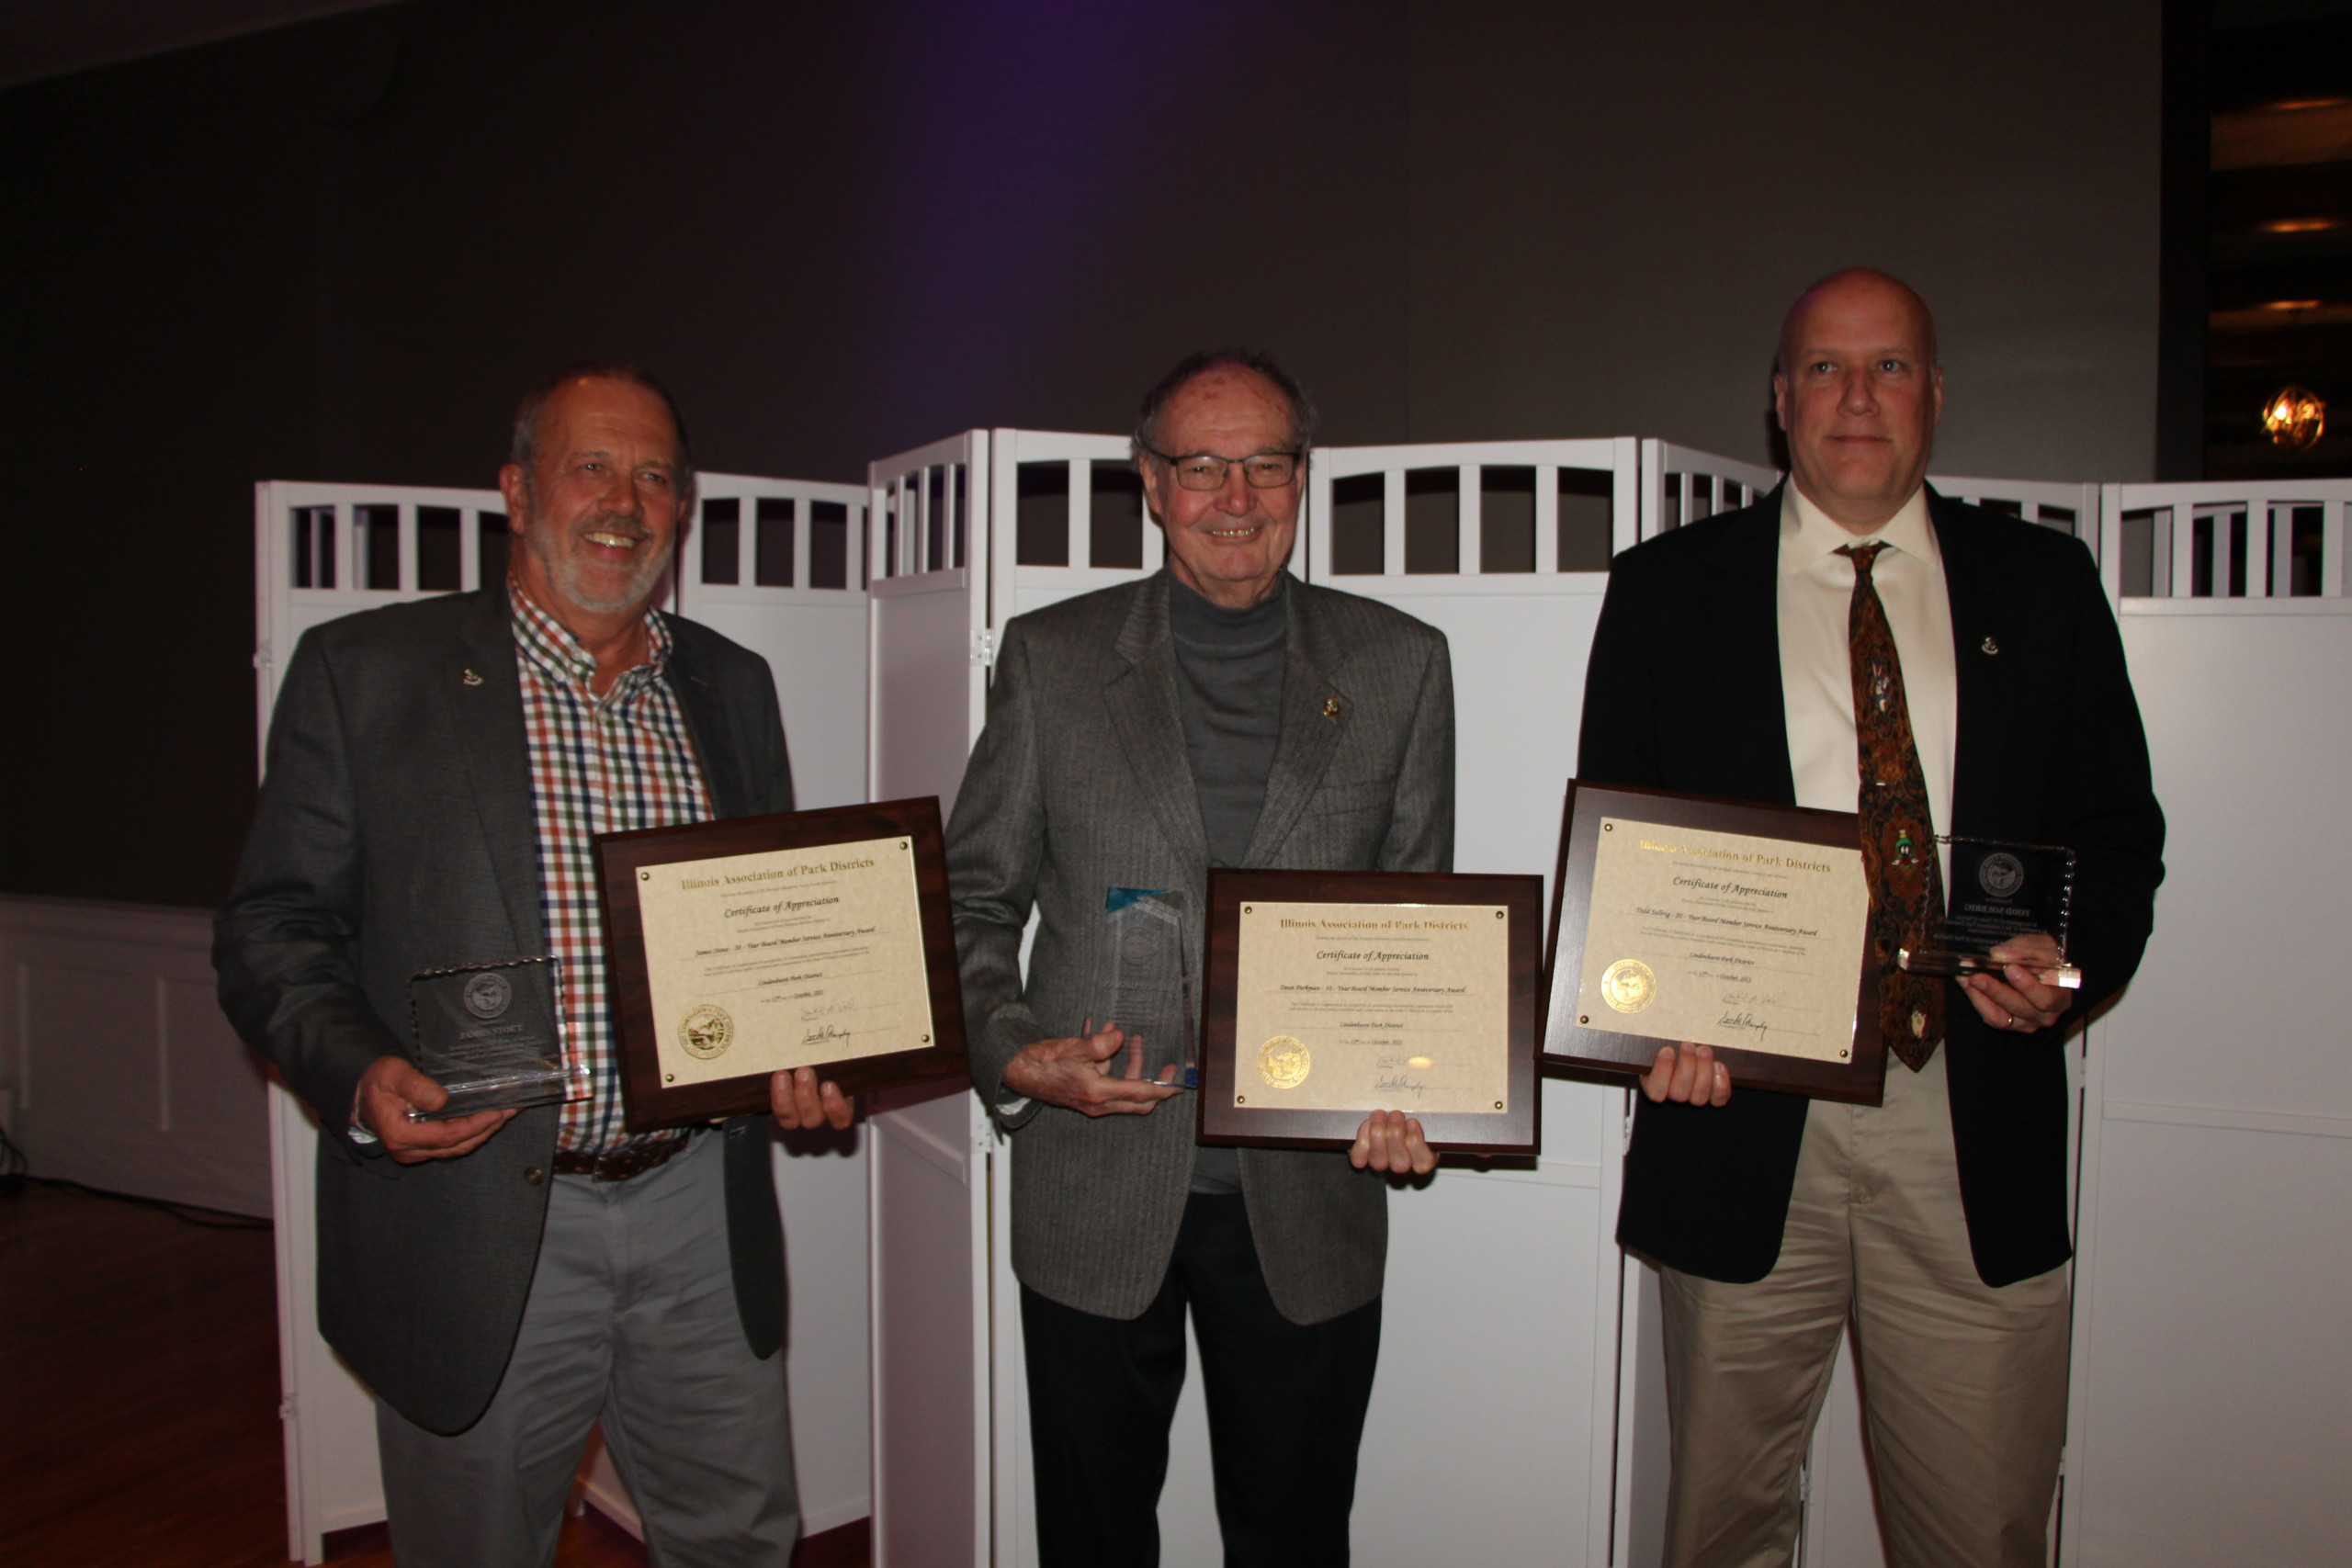 The Lindenhurst Park District Board of Park Commissioners President-Dean Parkman, Vice-President-Todd Solbrig, and Treasurer-James Stout were recognized on Friday, October 15, 2021, at the Illinois Association of Park Districts The Best of the Best Awards Gala for their years of dedicated service to the Lindenhurst Park District.